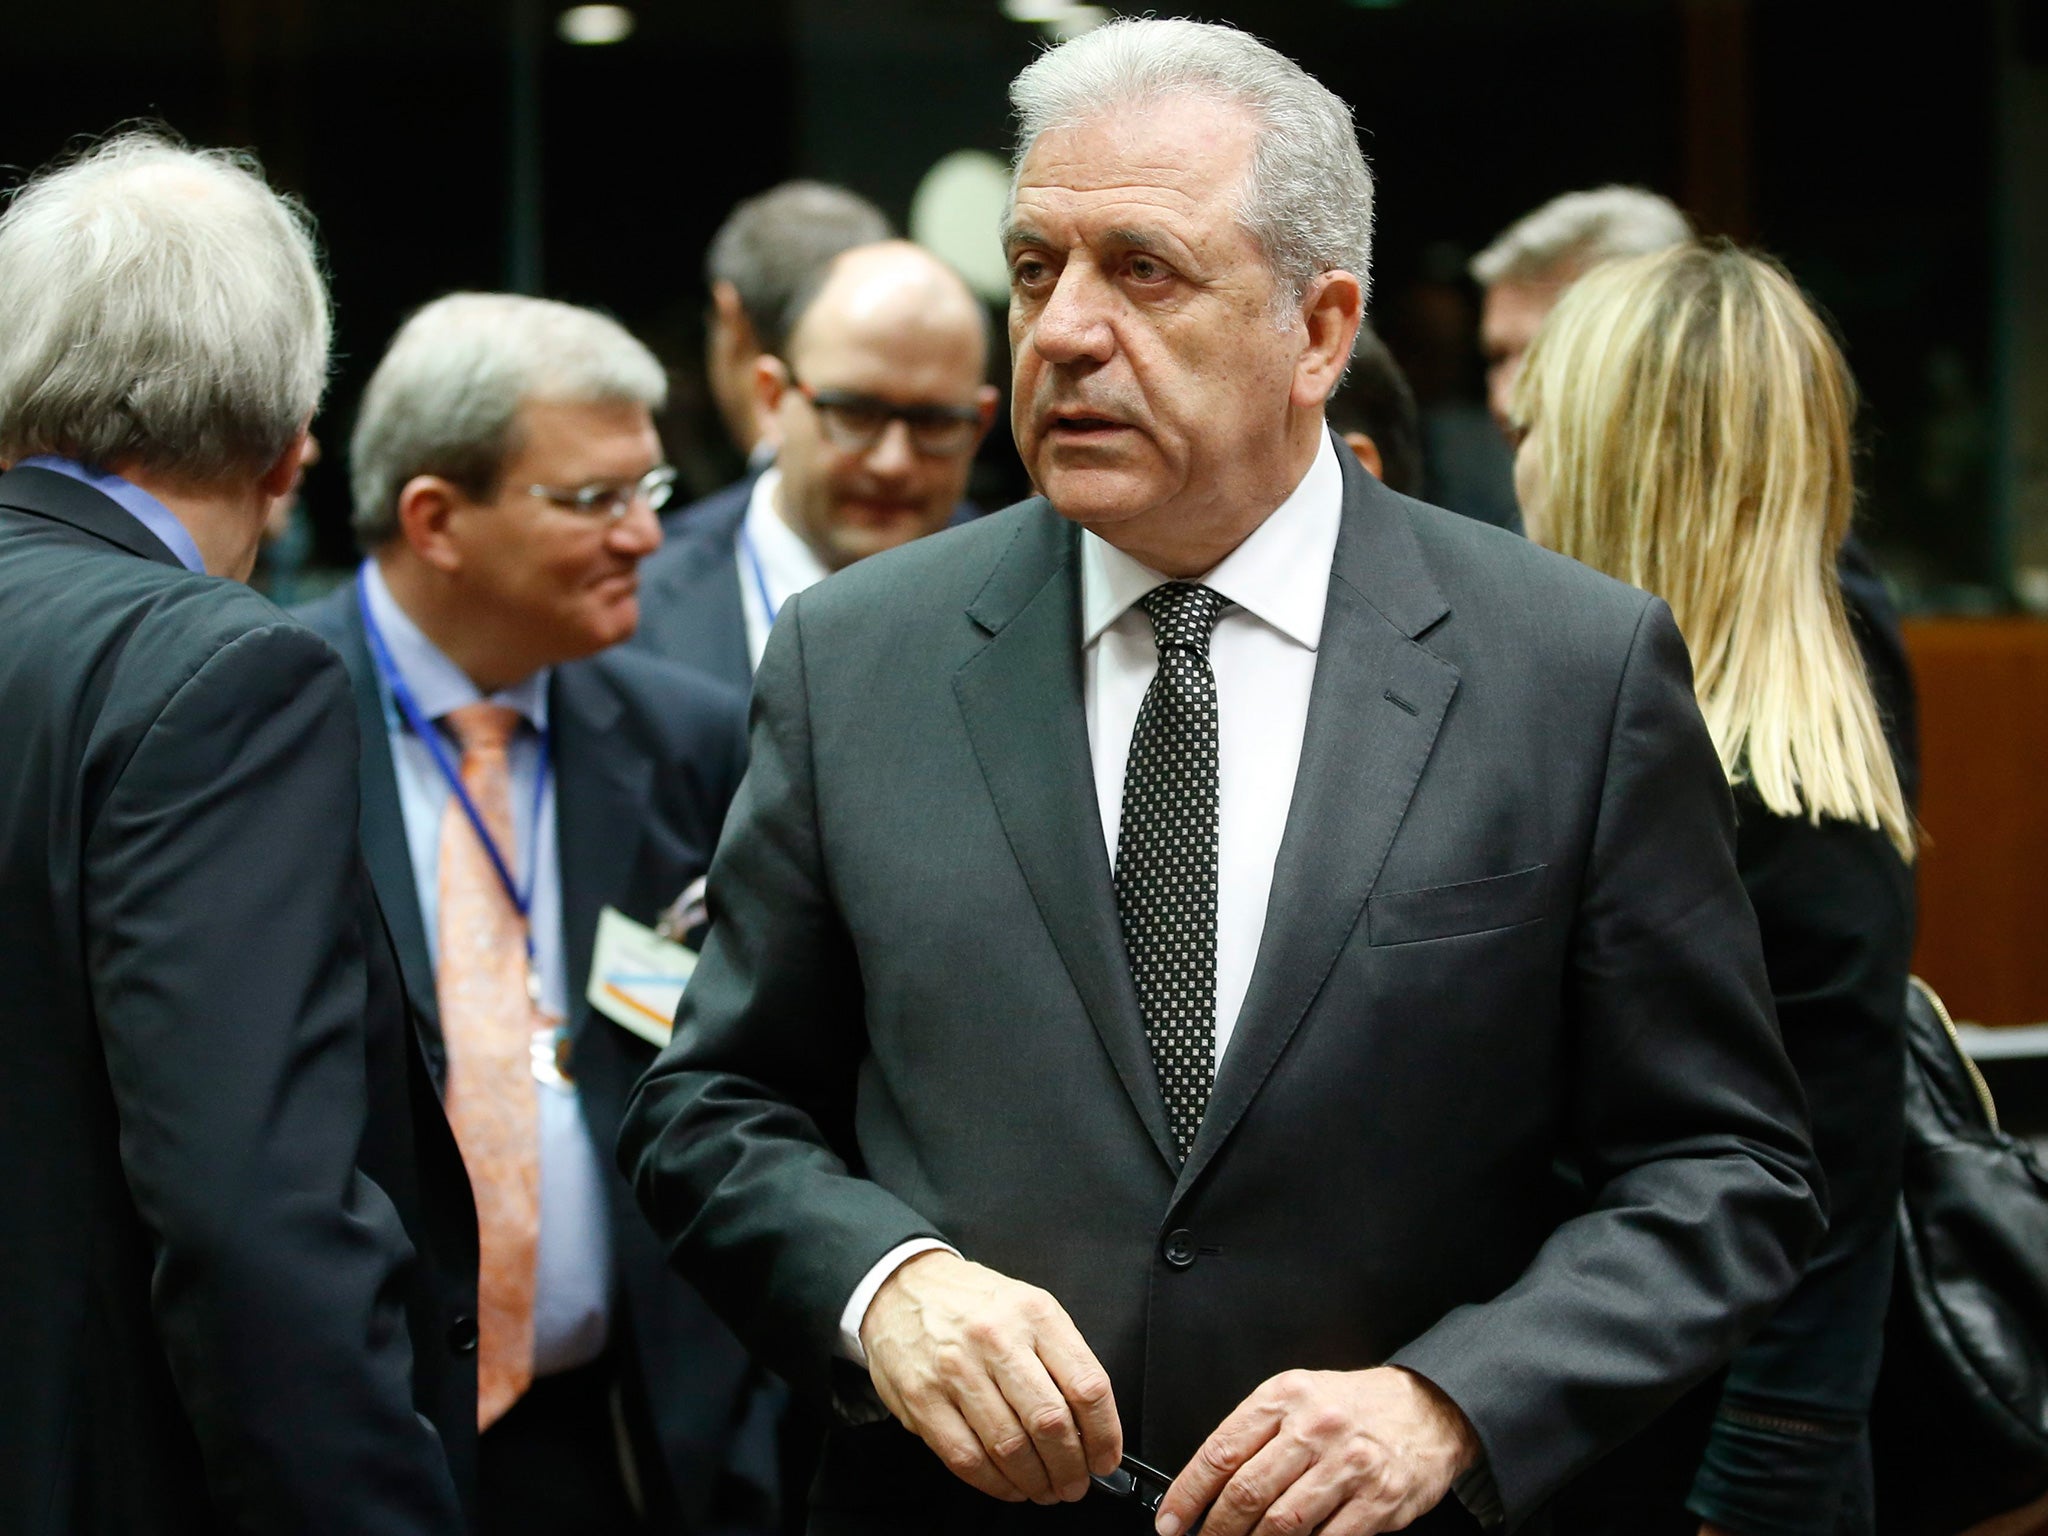 European Commissioner for Migration Dimitris Avramopoulos, wants to set up centres in Africa